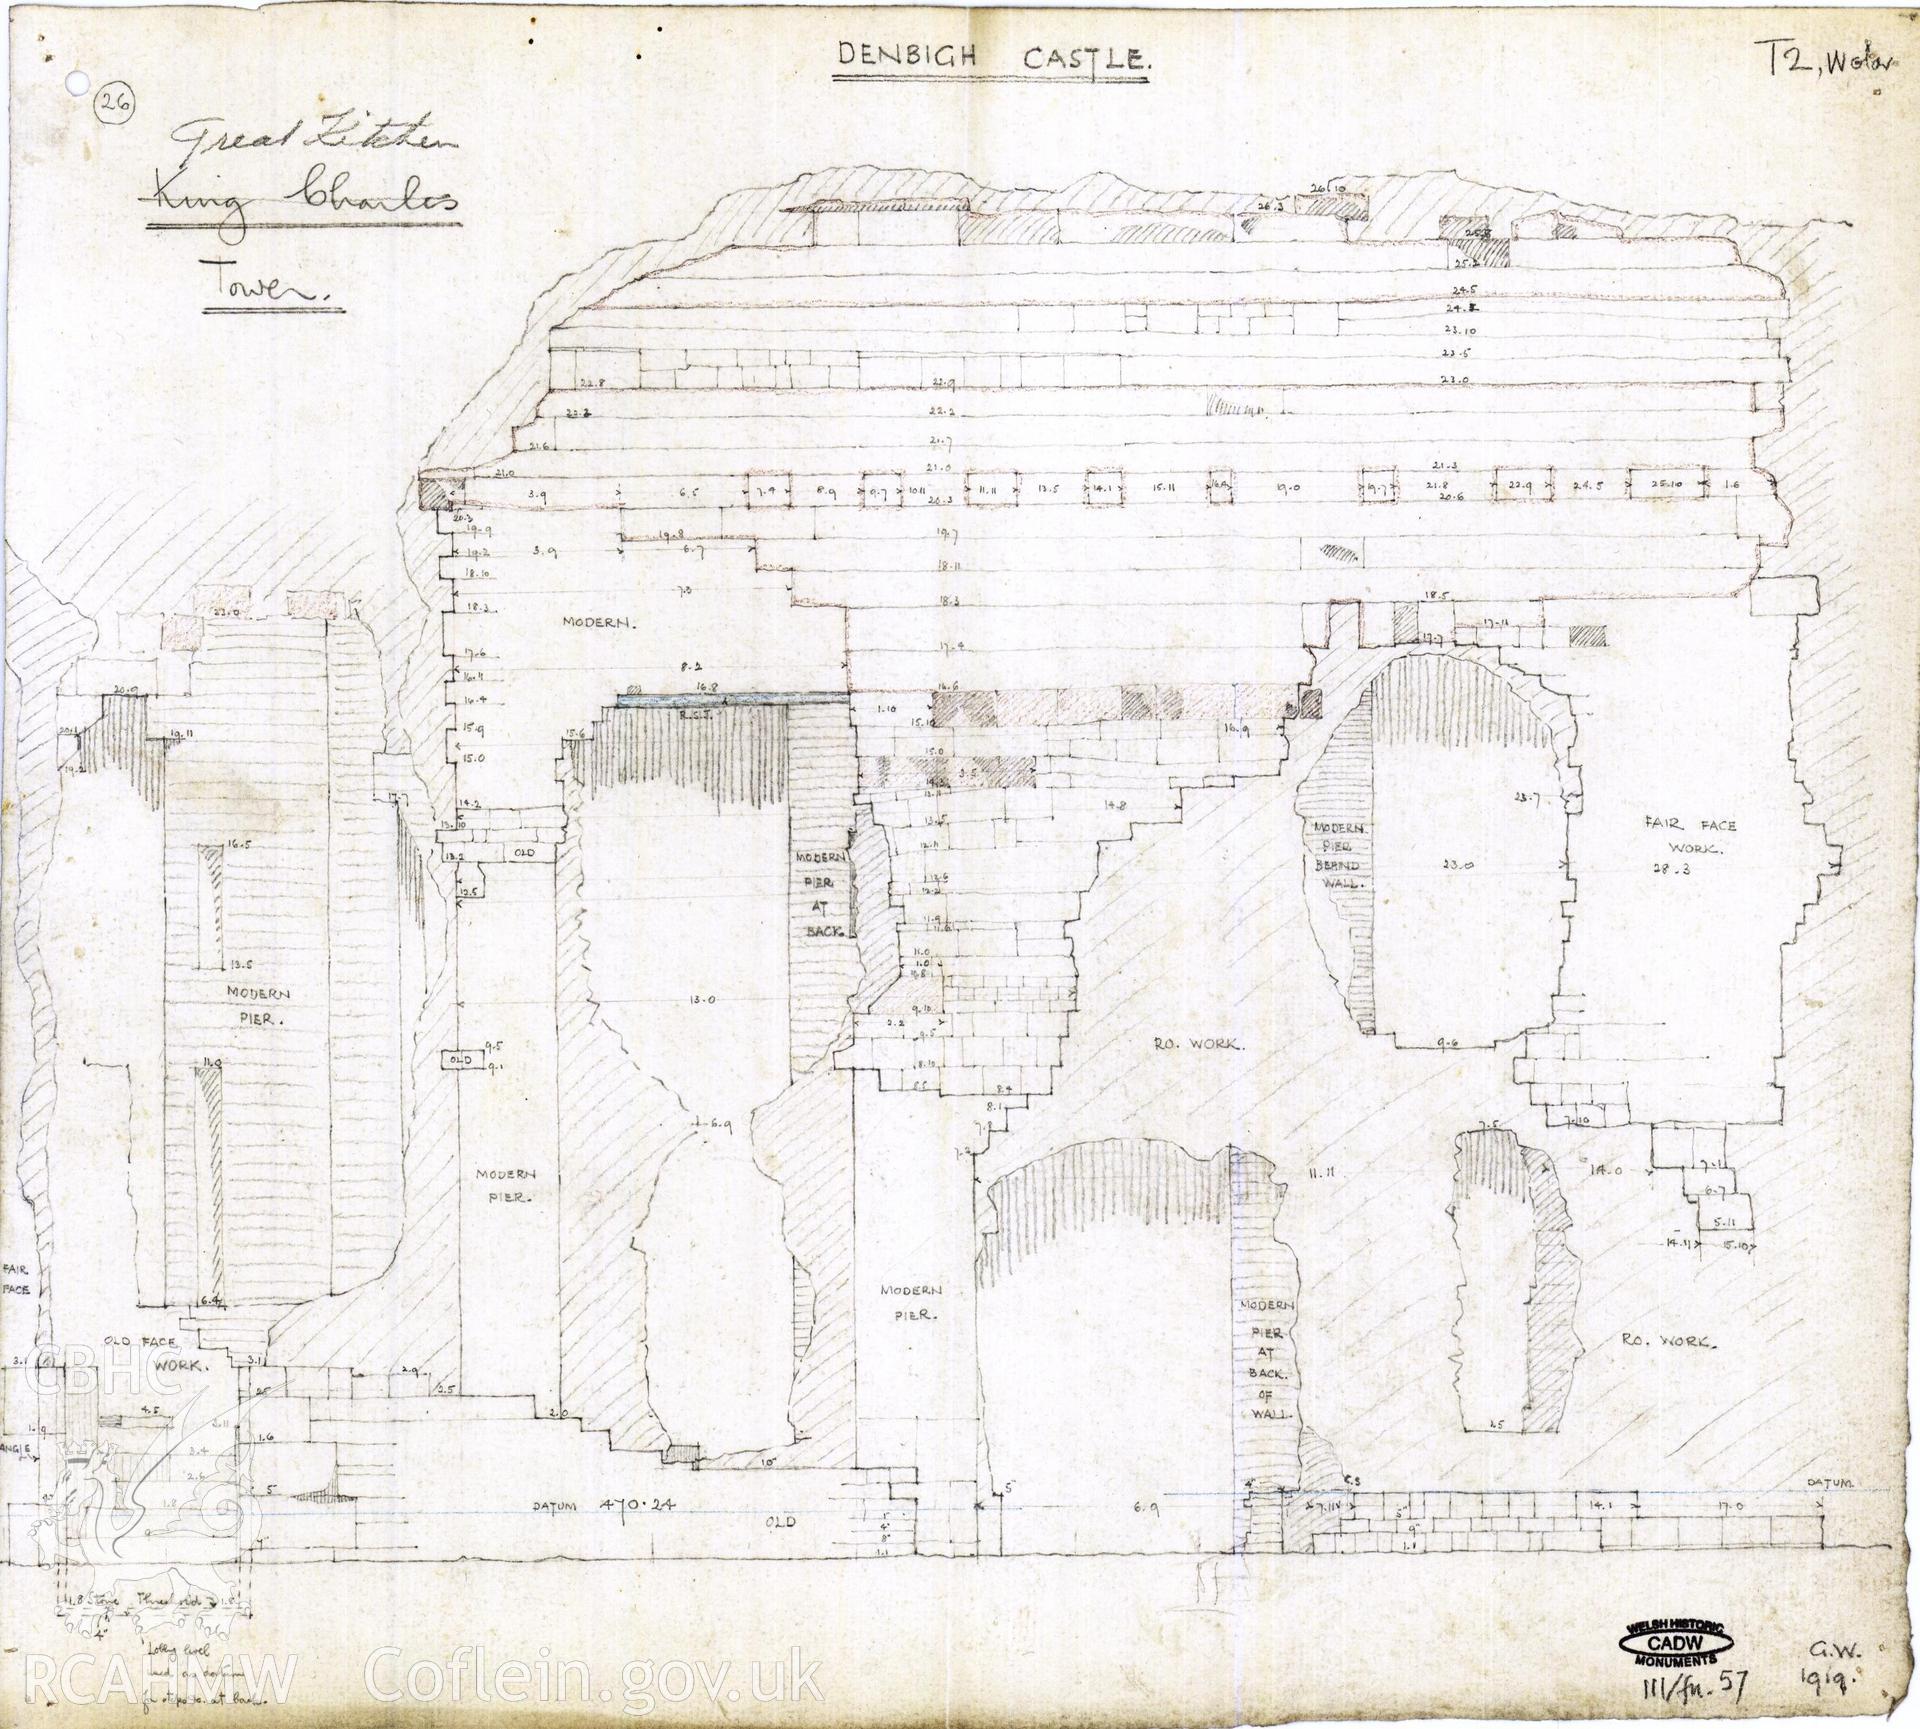 Cadw guardianship monument drawing of Denbigh Castle. T2, elevation to court. Cadw Ref. No:111/fn.57. No scale.